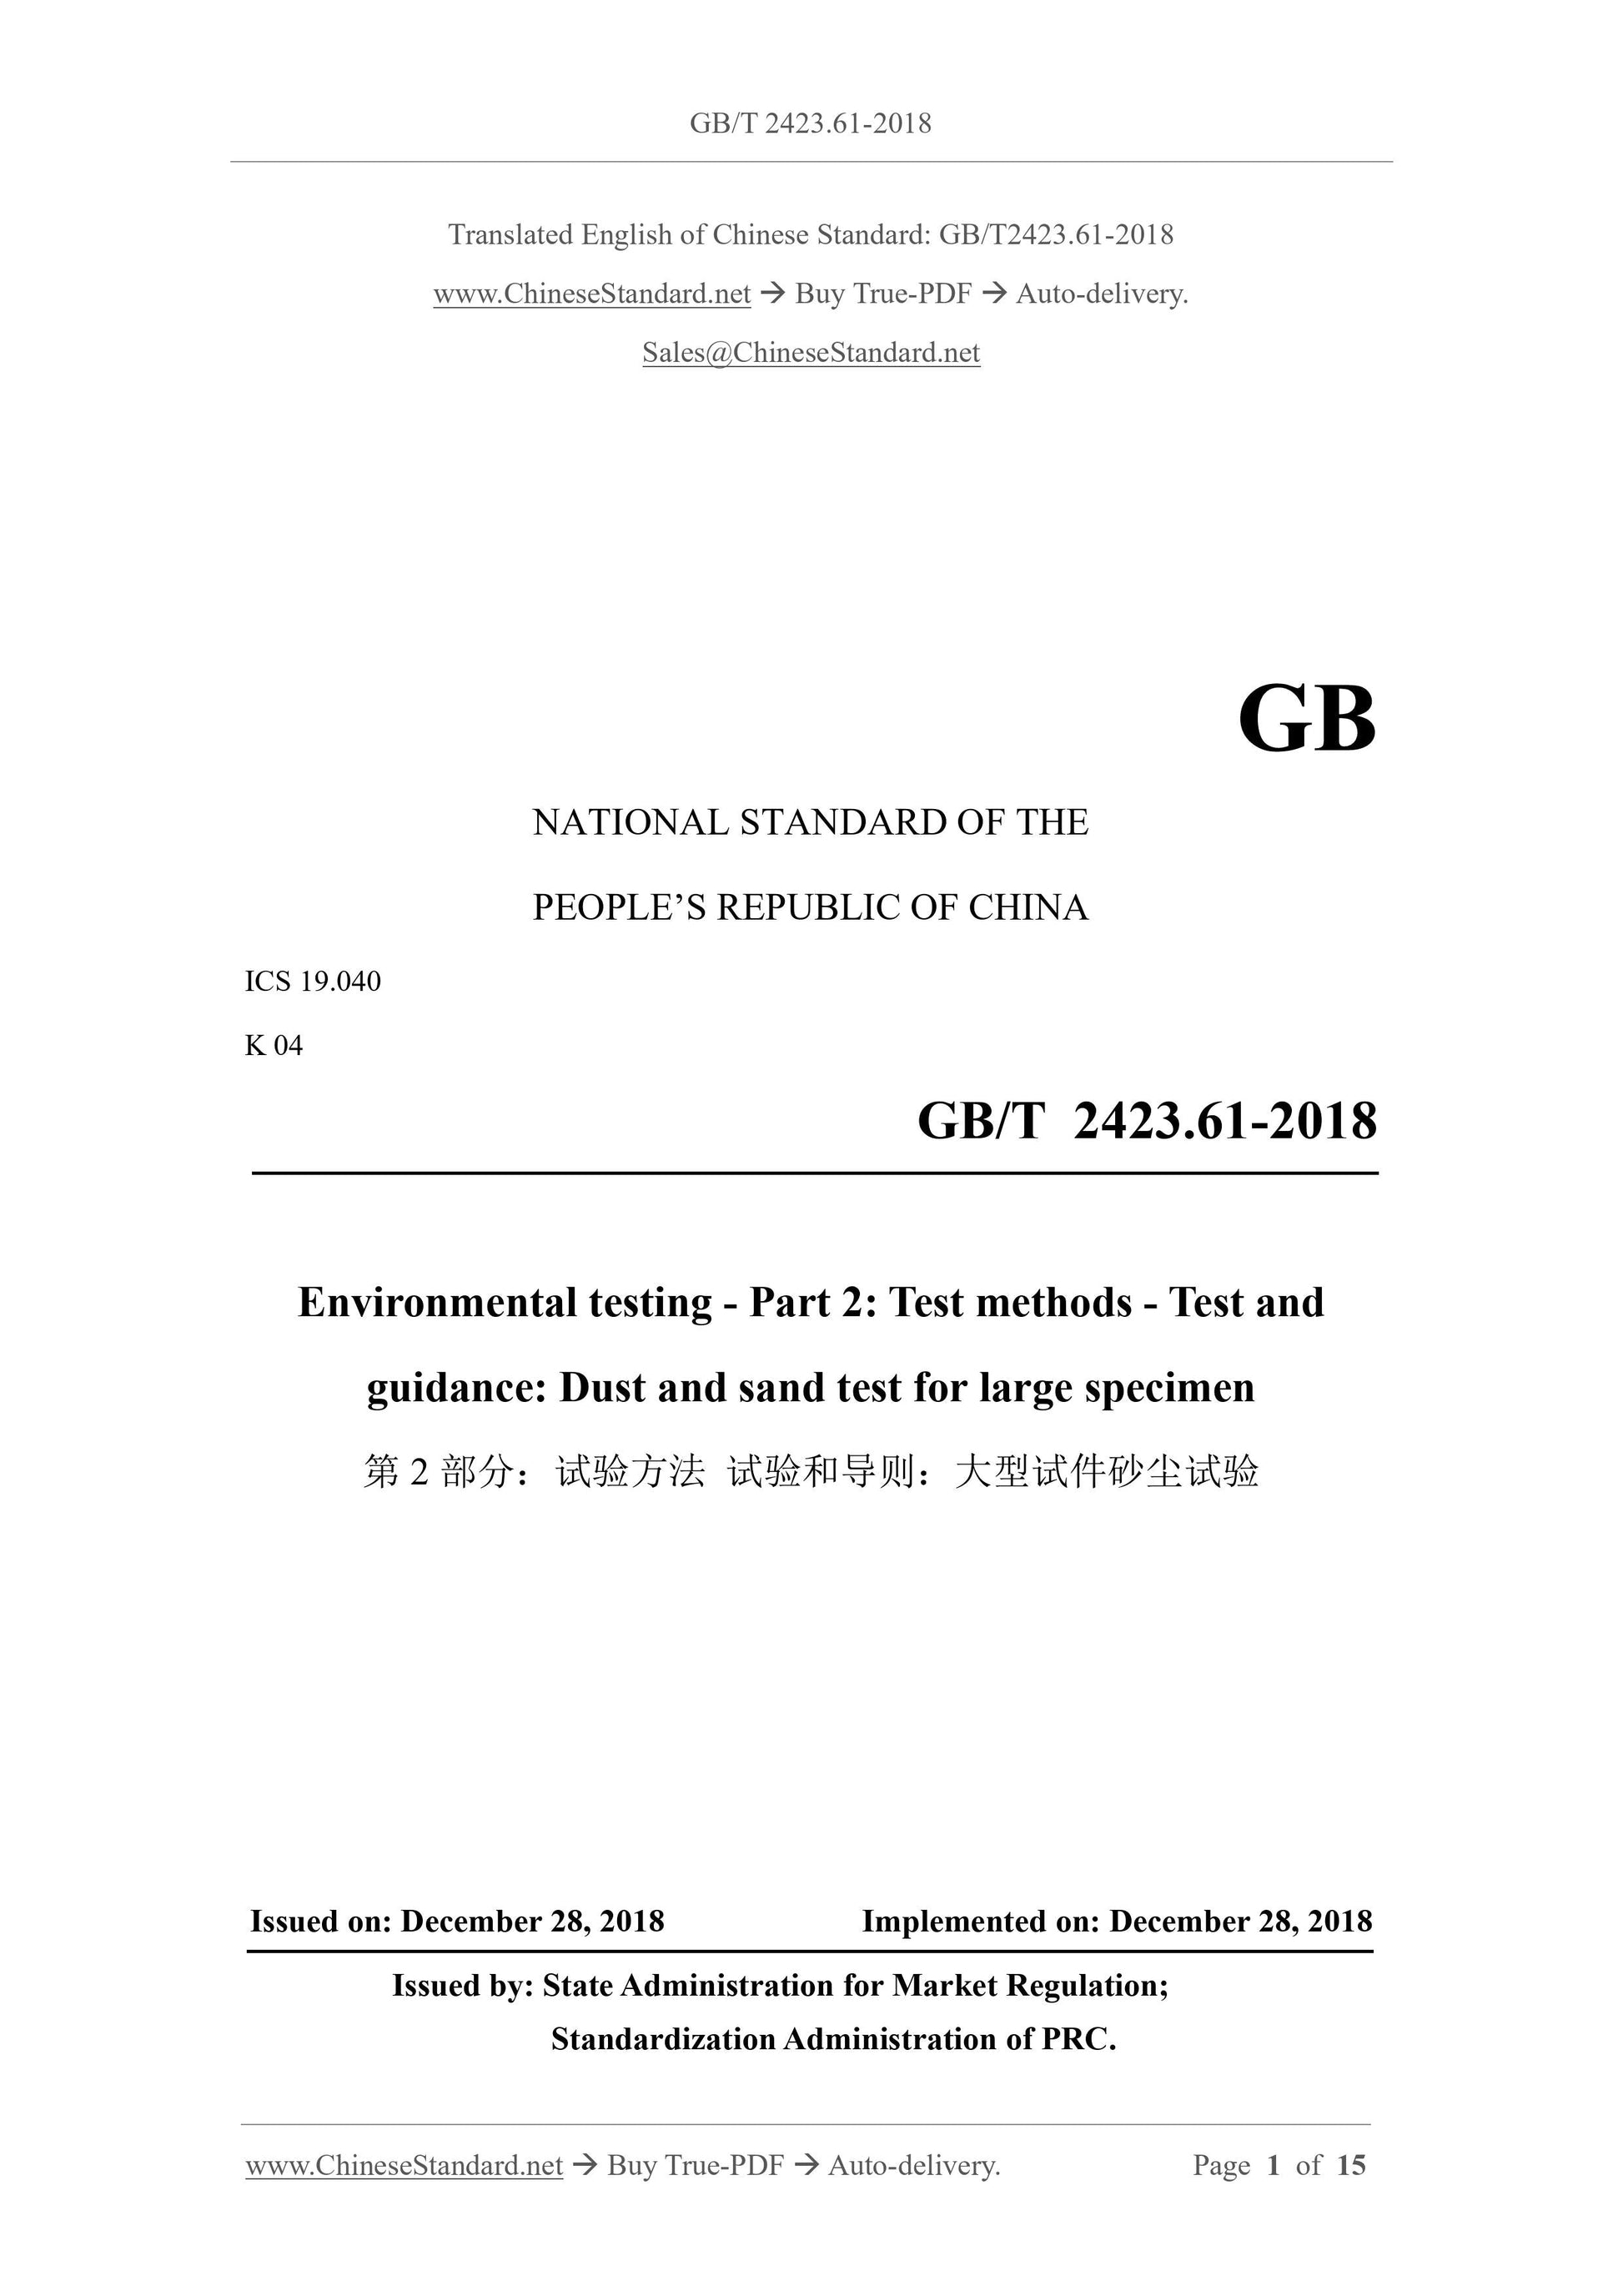 GB/T 2423.61-2018 Page 1